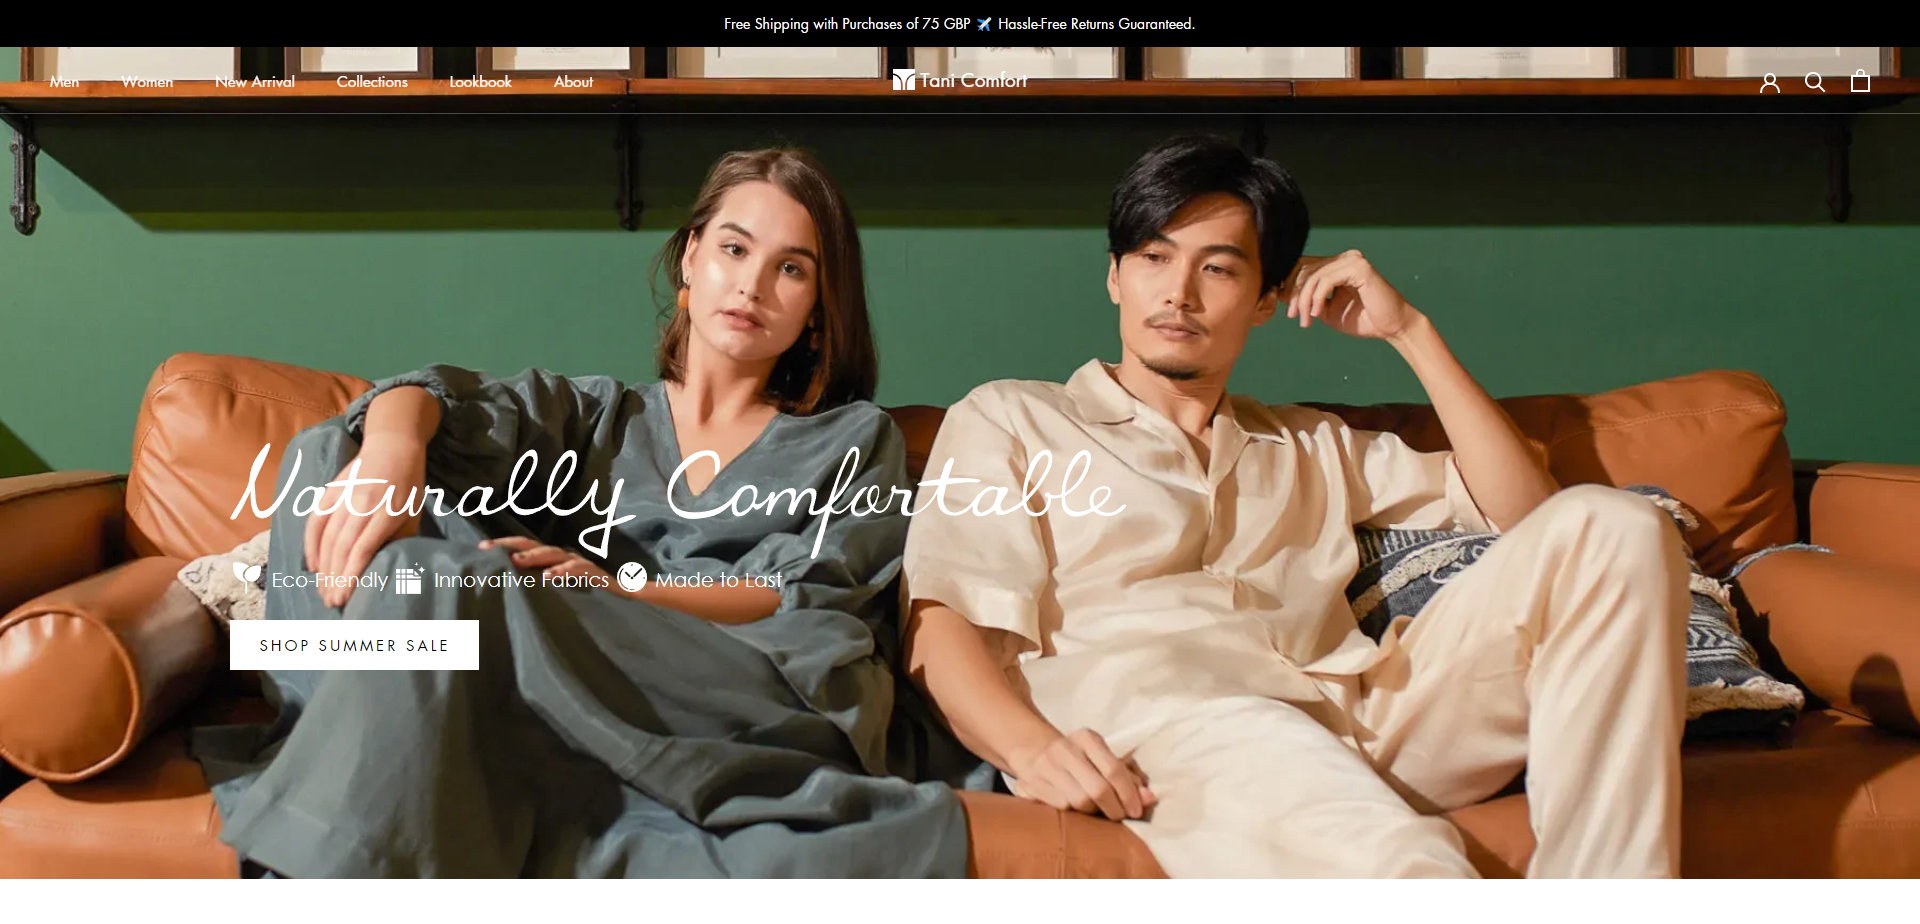 Referral Landing Page for Tani Comforts